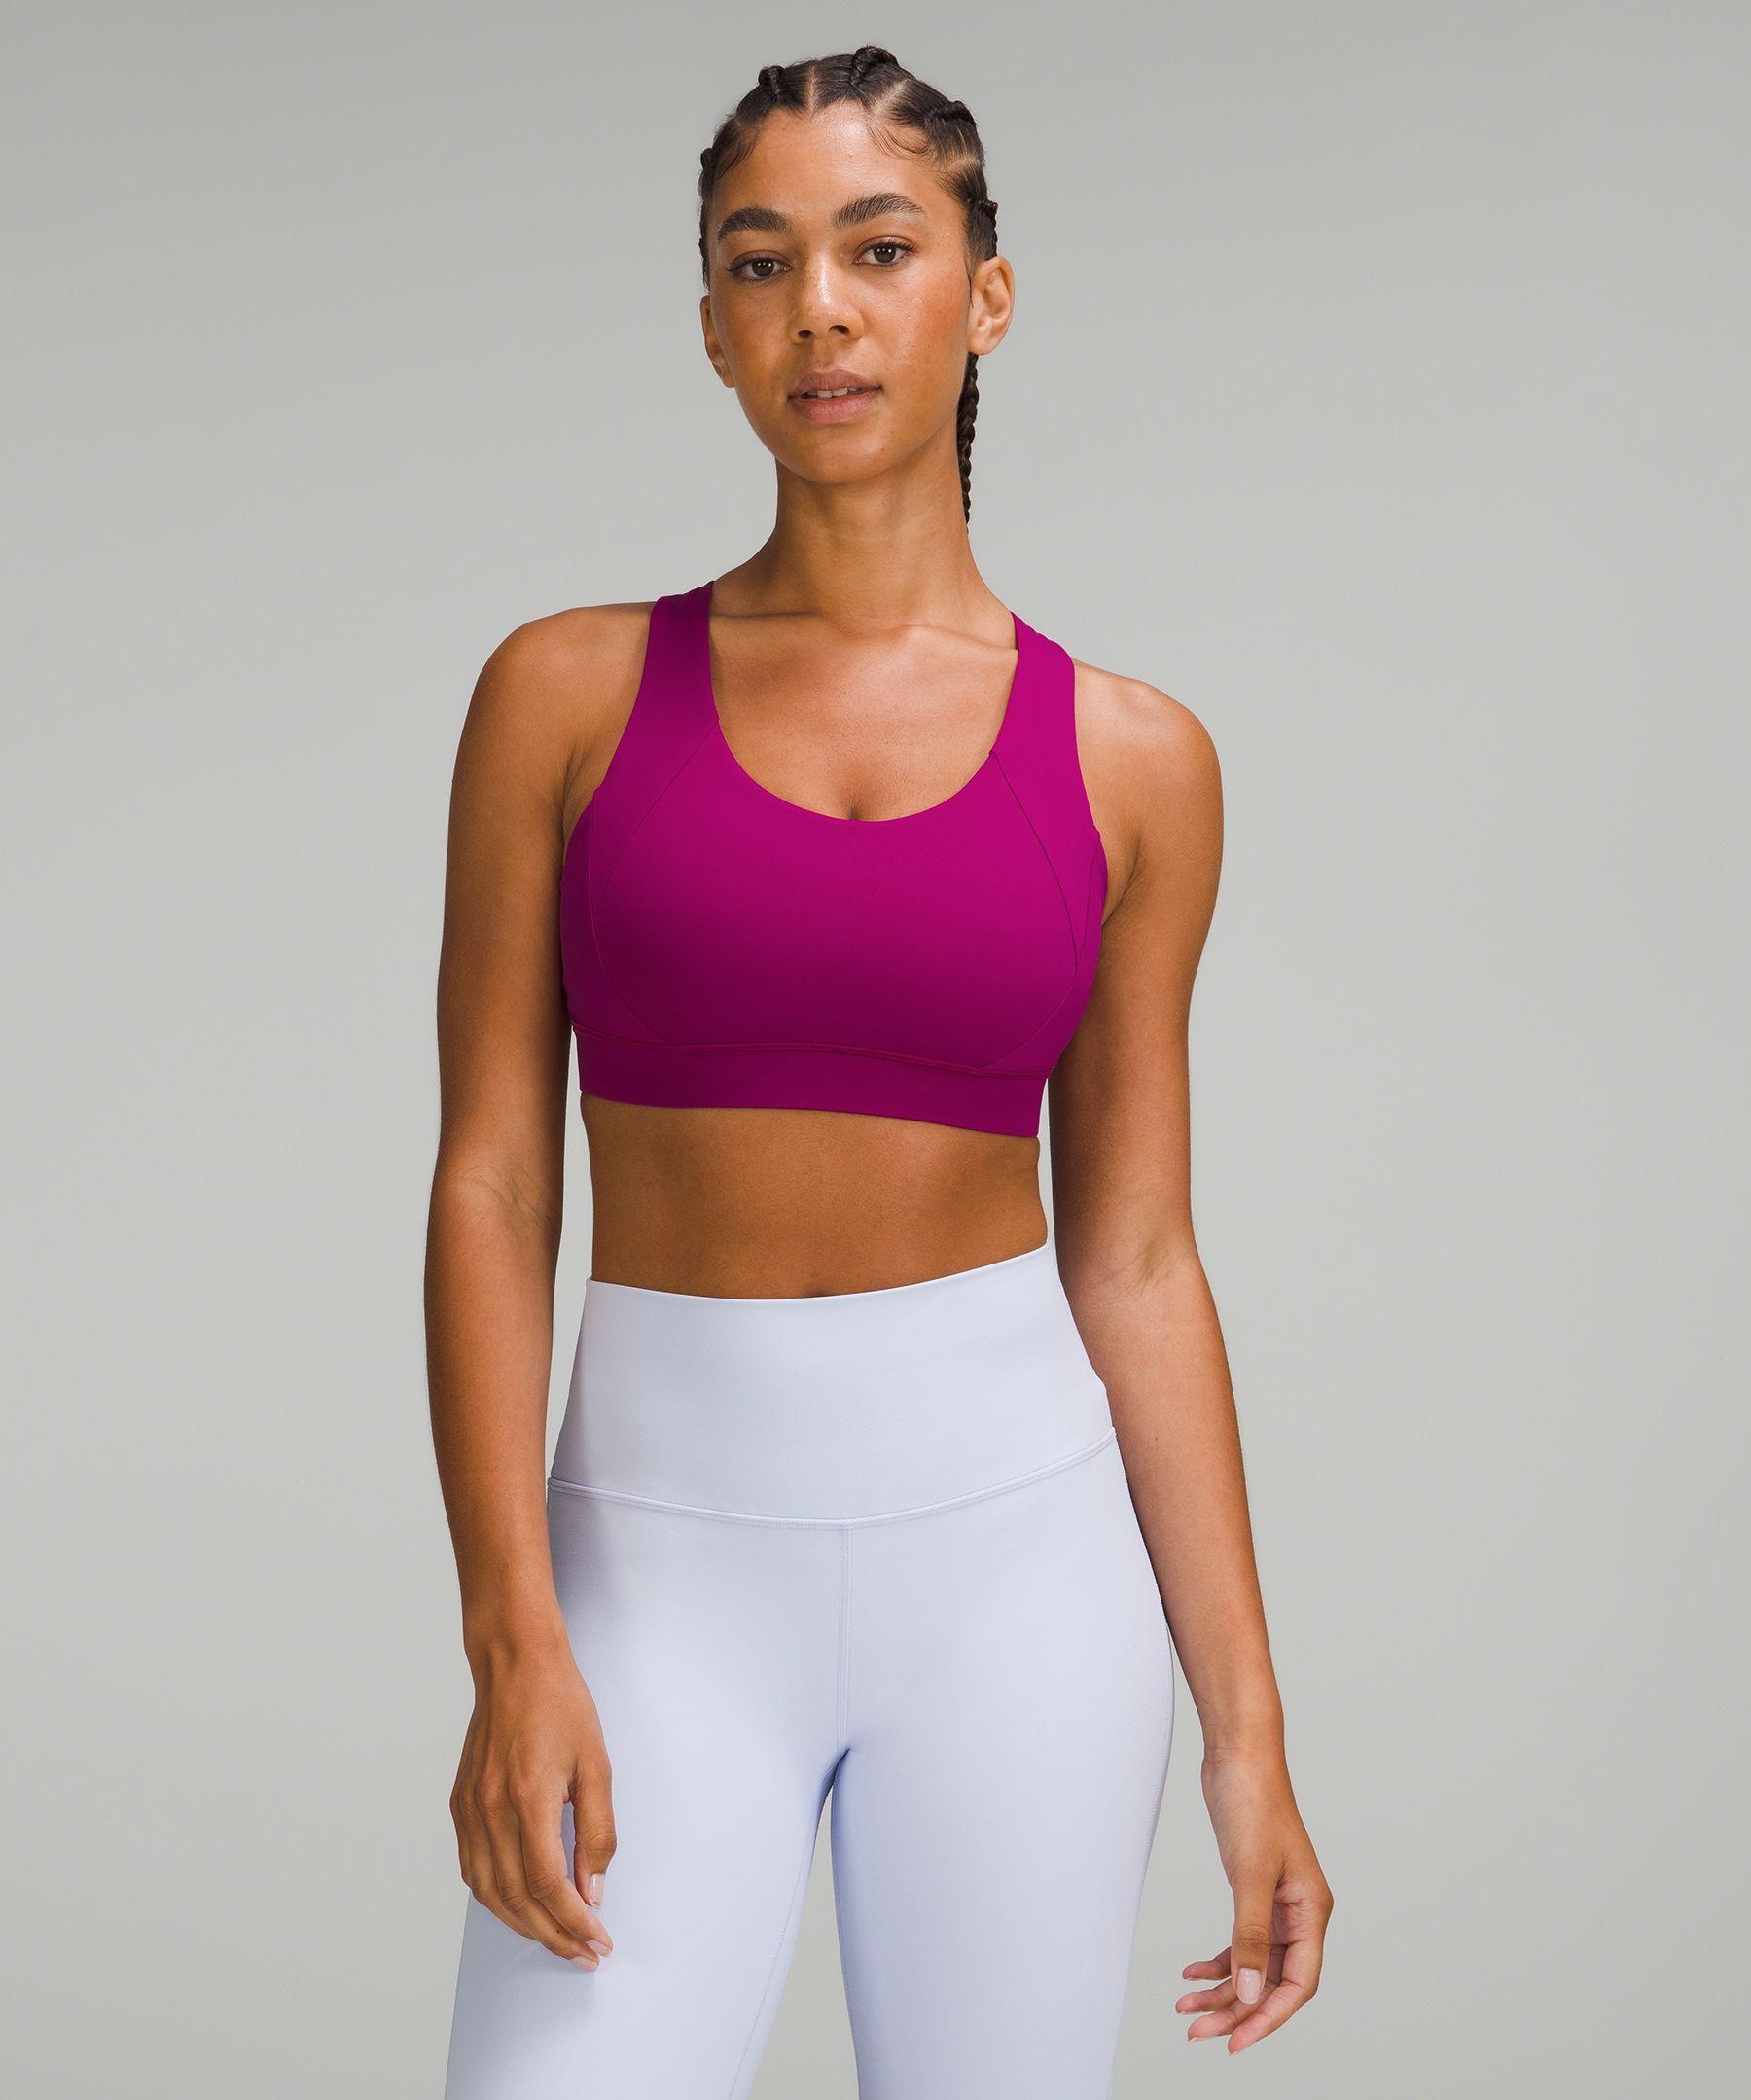 lululemon athletica Free To Be Elevated Bra Light Support, Dd/ddd(e) Cup in  Pink